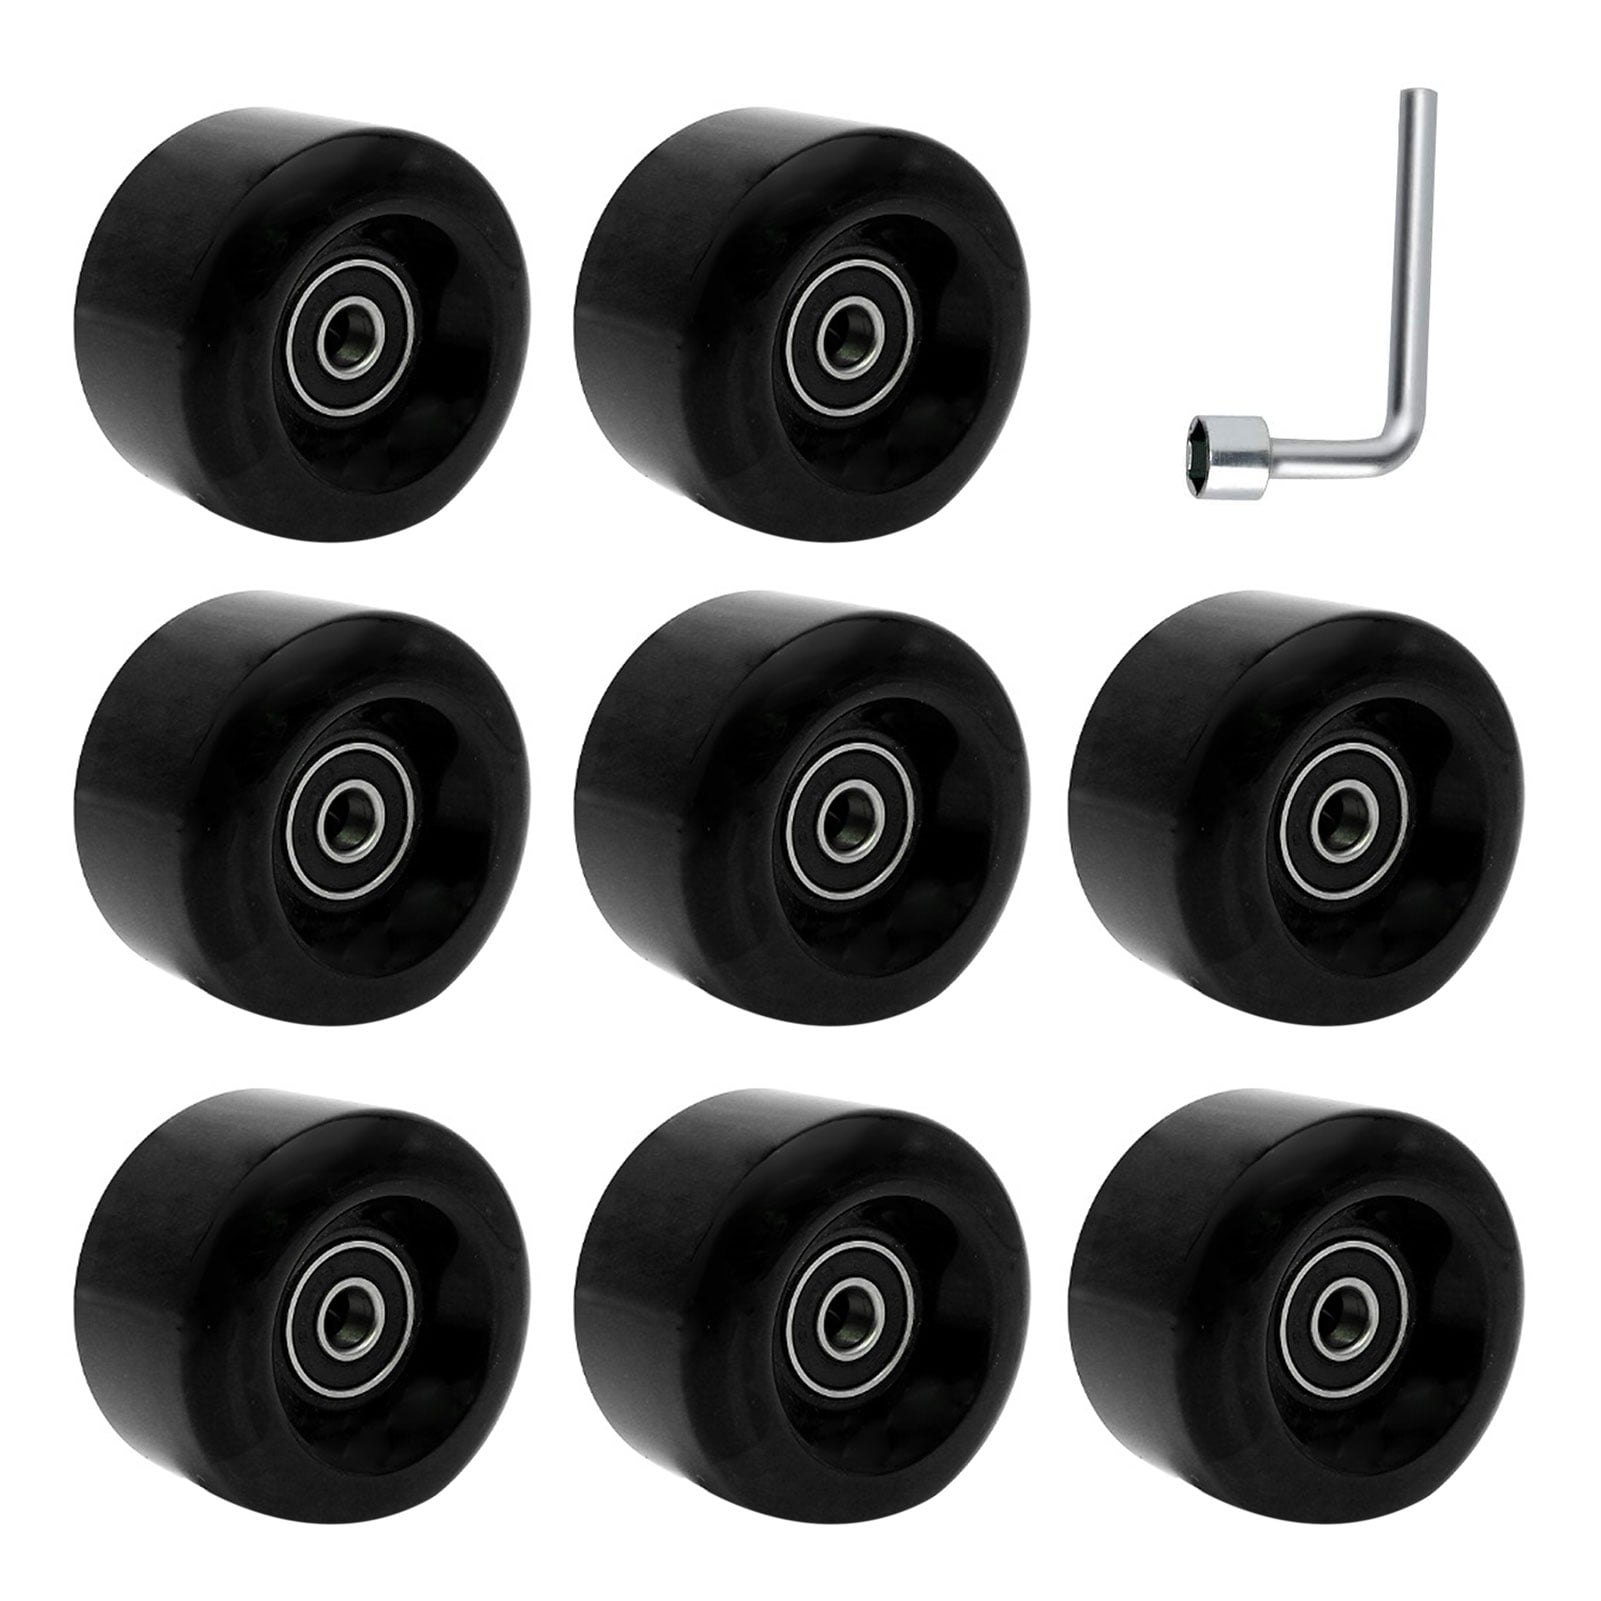 8 Piece Roller Skate Wheels Skate Wheels with Bearings Installed for Indoor Or Outdoor Double Row Skating and Skateboard 36 X 11 Mm 82a 